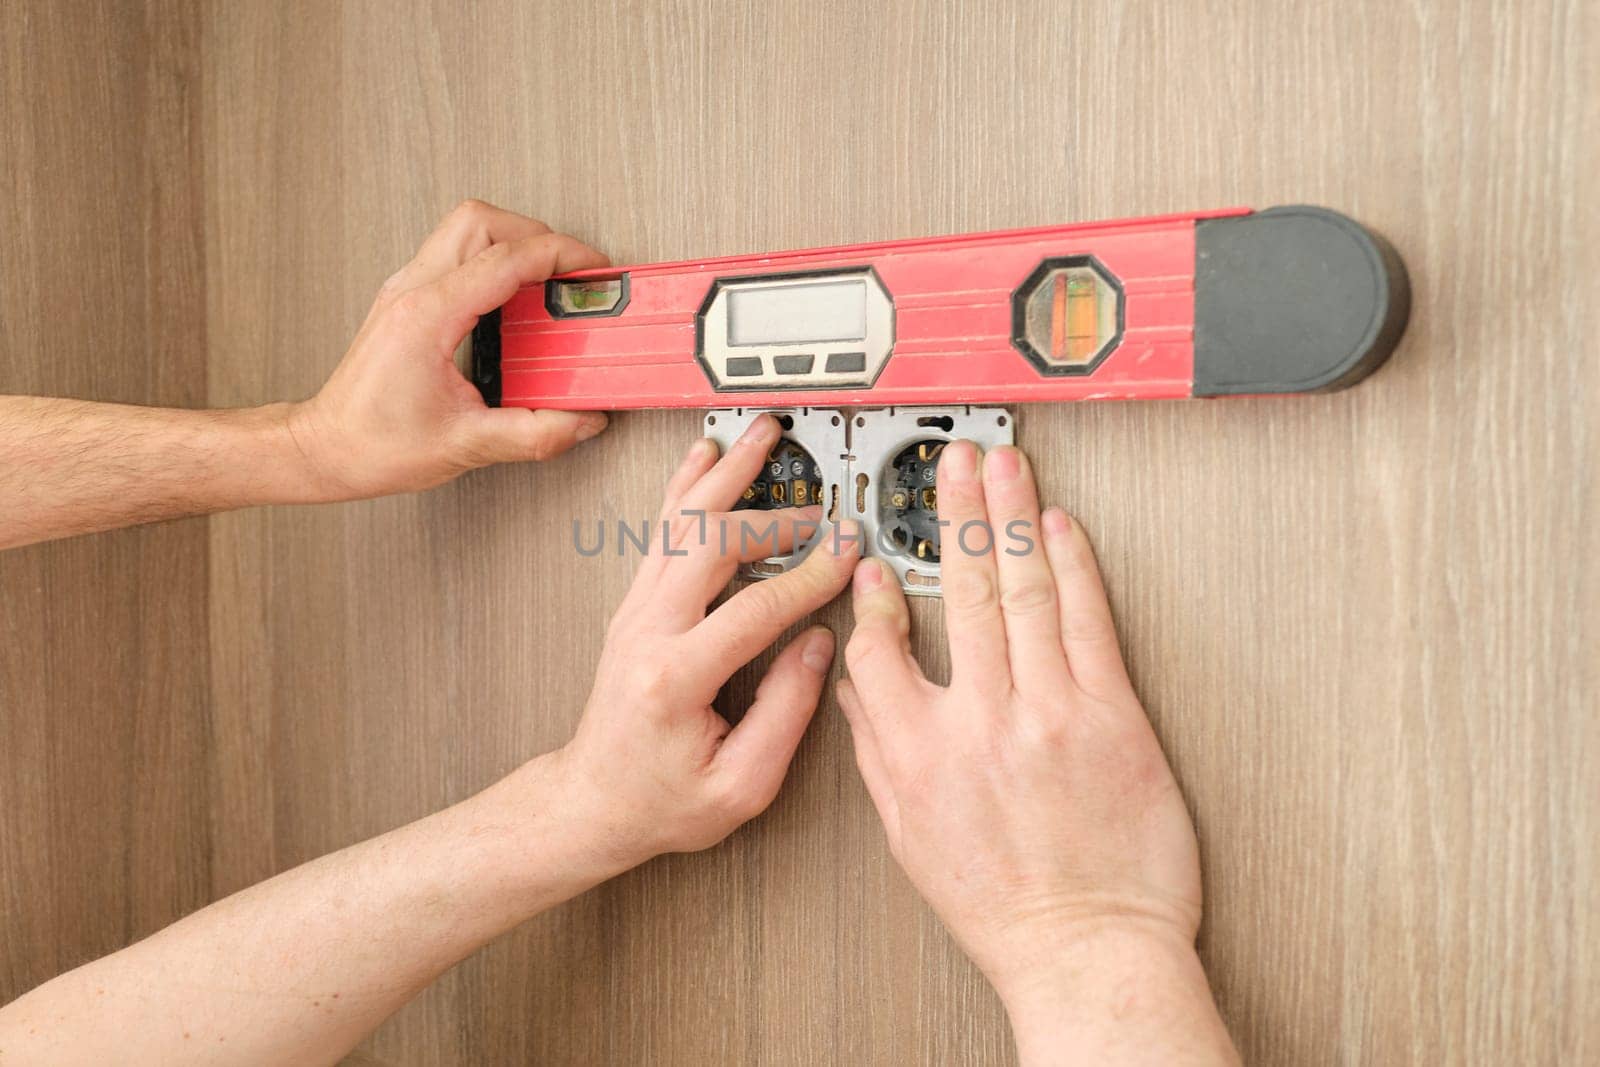 Repair and installation of furniture, hands of electrician worker installing electrical outlet in furniture using screwdriver and level